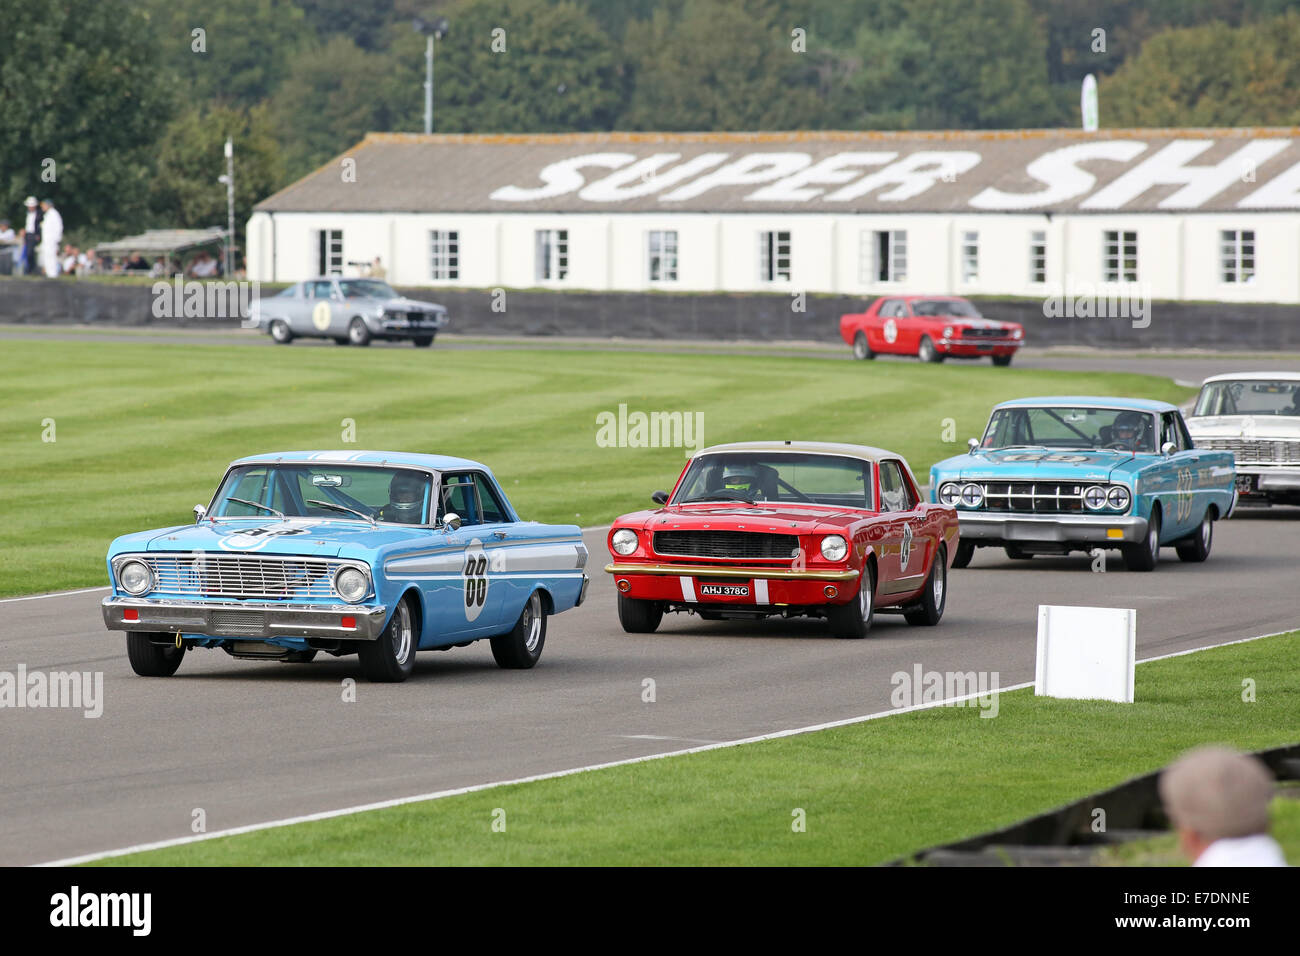 Chichester, West Sussex, UK. 13th Sep, 2014. Pictures from the Goodwood Revival 2014 - The Shelby Cup - A race for saloon cars powered by small-block V8 engines on the 60th anniversary of the small-block V8 engine. A large number of Ford Mustangs mariking the car's 50th anniversary took on other American classics such as Ford Falcon, Plymouth Barracuda, Mercury Comet Cyclone and Dodge Dart. Picture shows: Rob Hall driving a 1964 Ford Falcon Spirit Credit:  Oliver Dixon/Alamy Live News Stock Photo